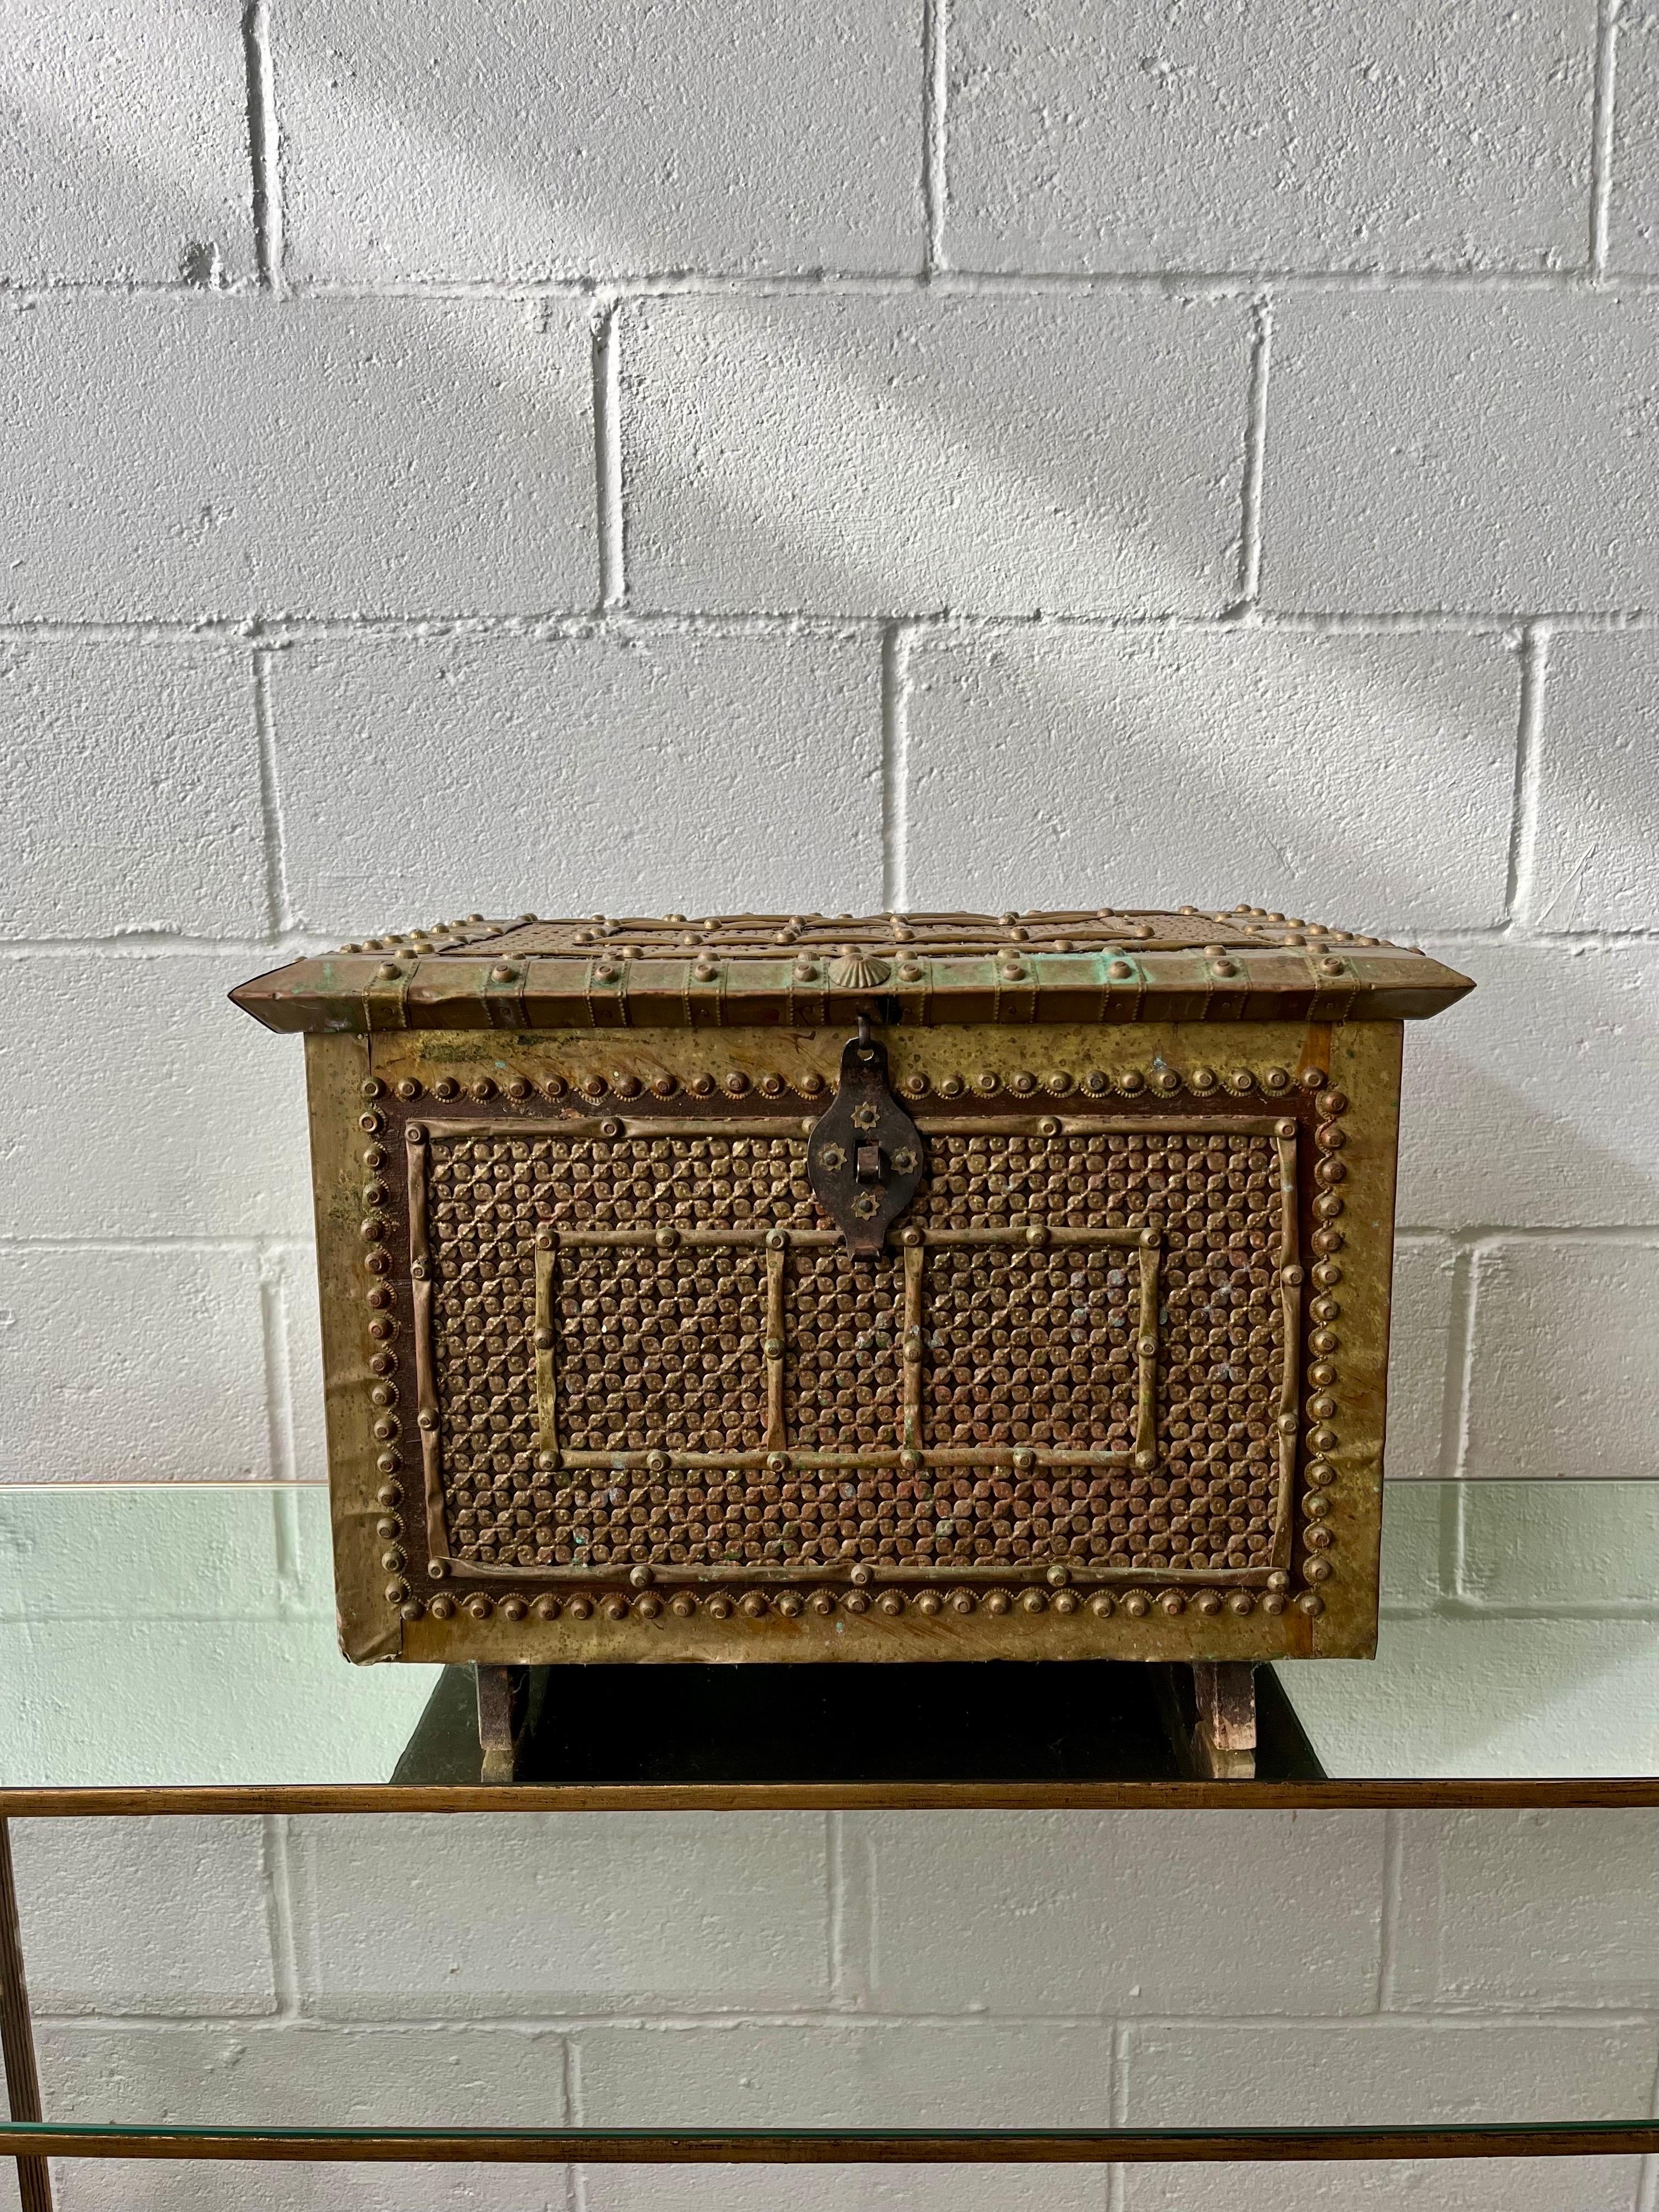 Spectacular example of a brass coal or tinder box. Detail all over makes this a perfect piece for design and function. Nicely aged wooden interior.
Curbside to NYC/Philly $300